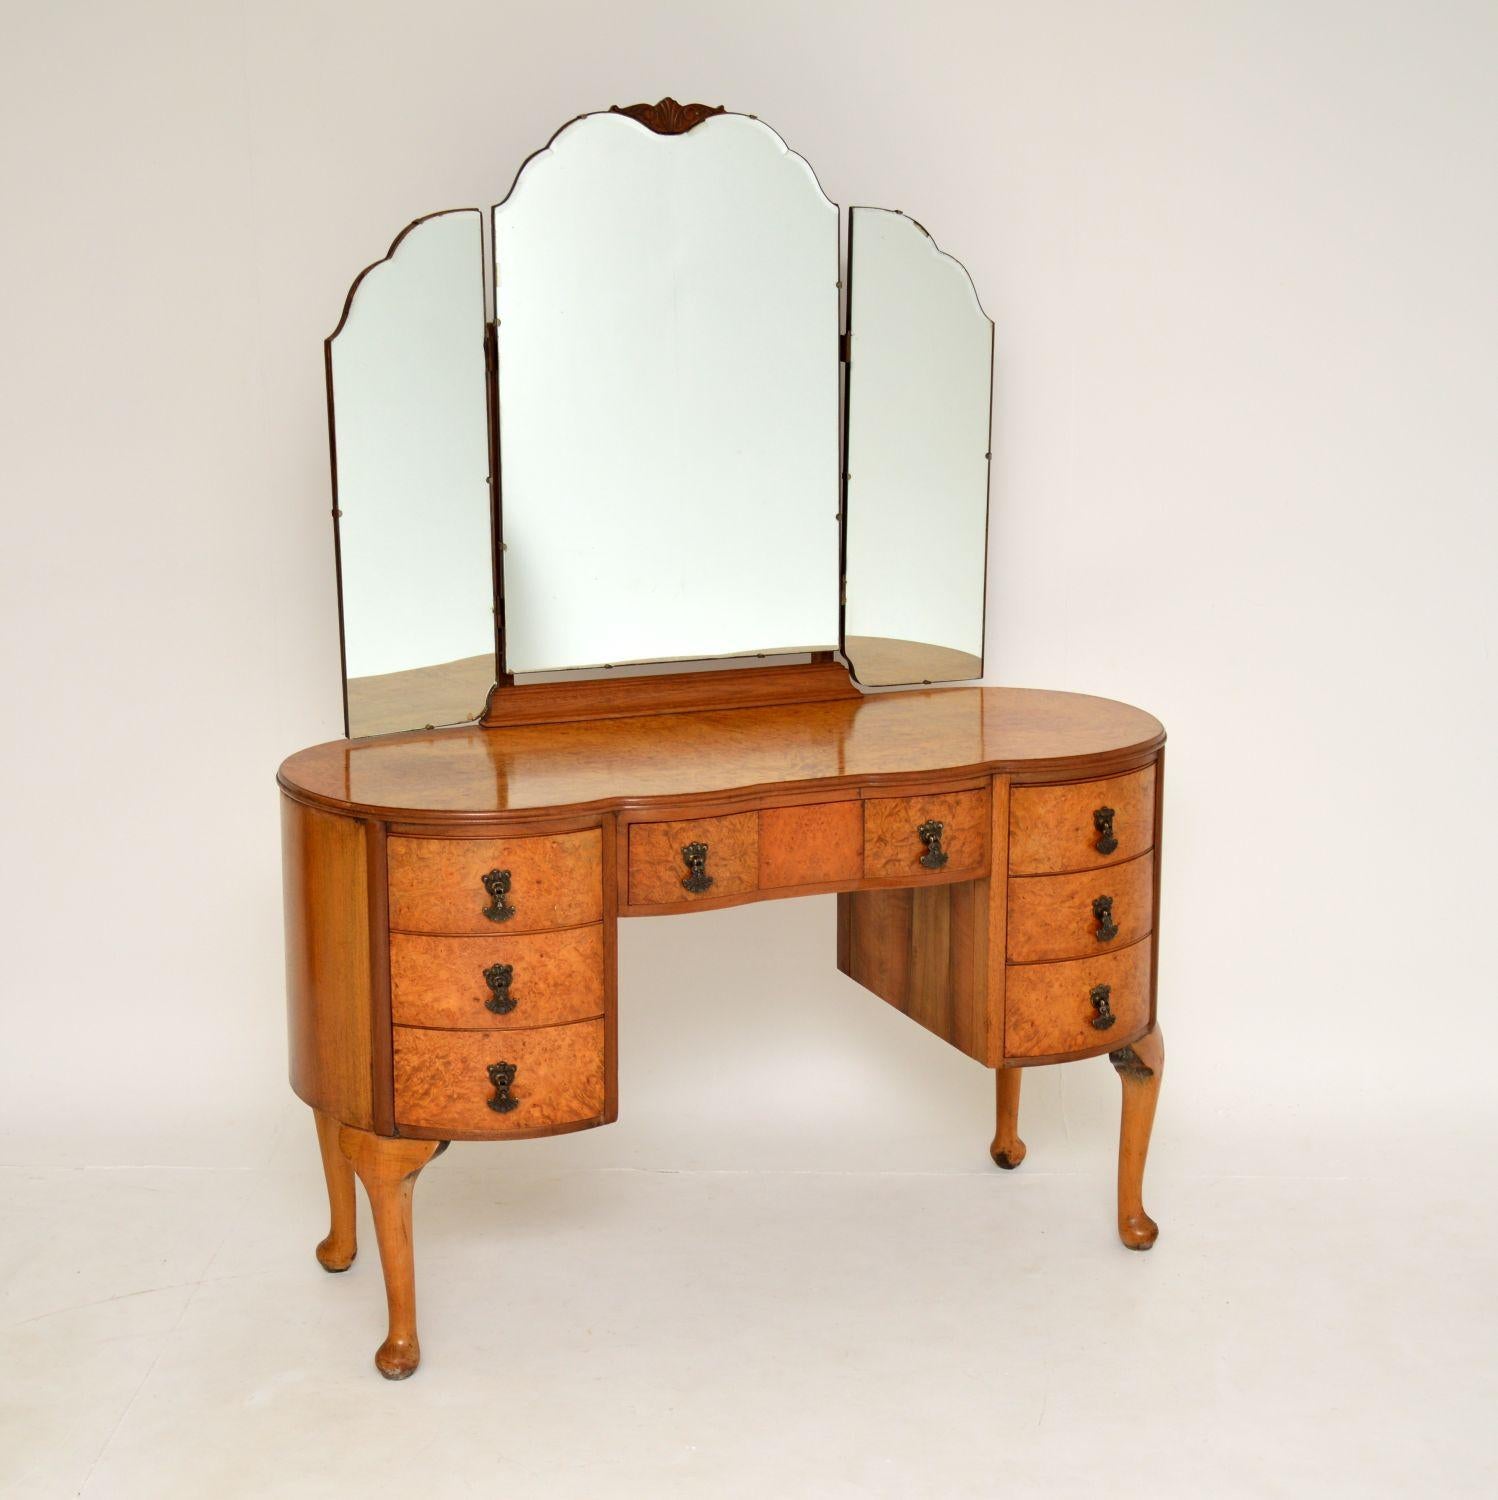 A beautiful antique burr walnut dressing table in the Queen Anne style & dating from around the 1930’s period.

This is very well made and has a wonderful shapely design. It is a very useful size and looks great from all angles, there is plenty of